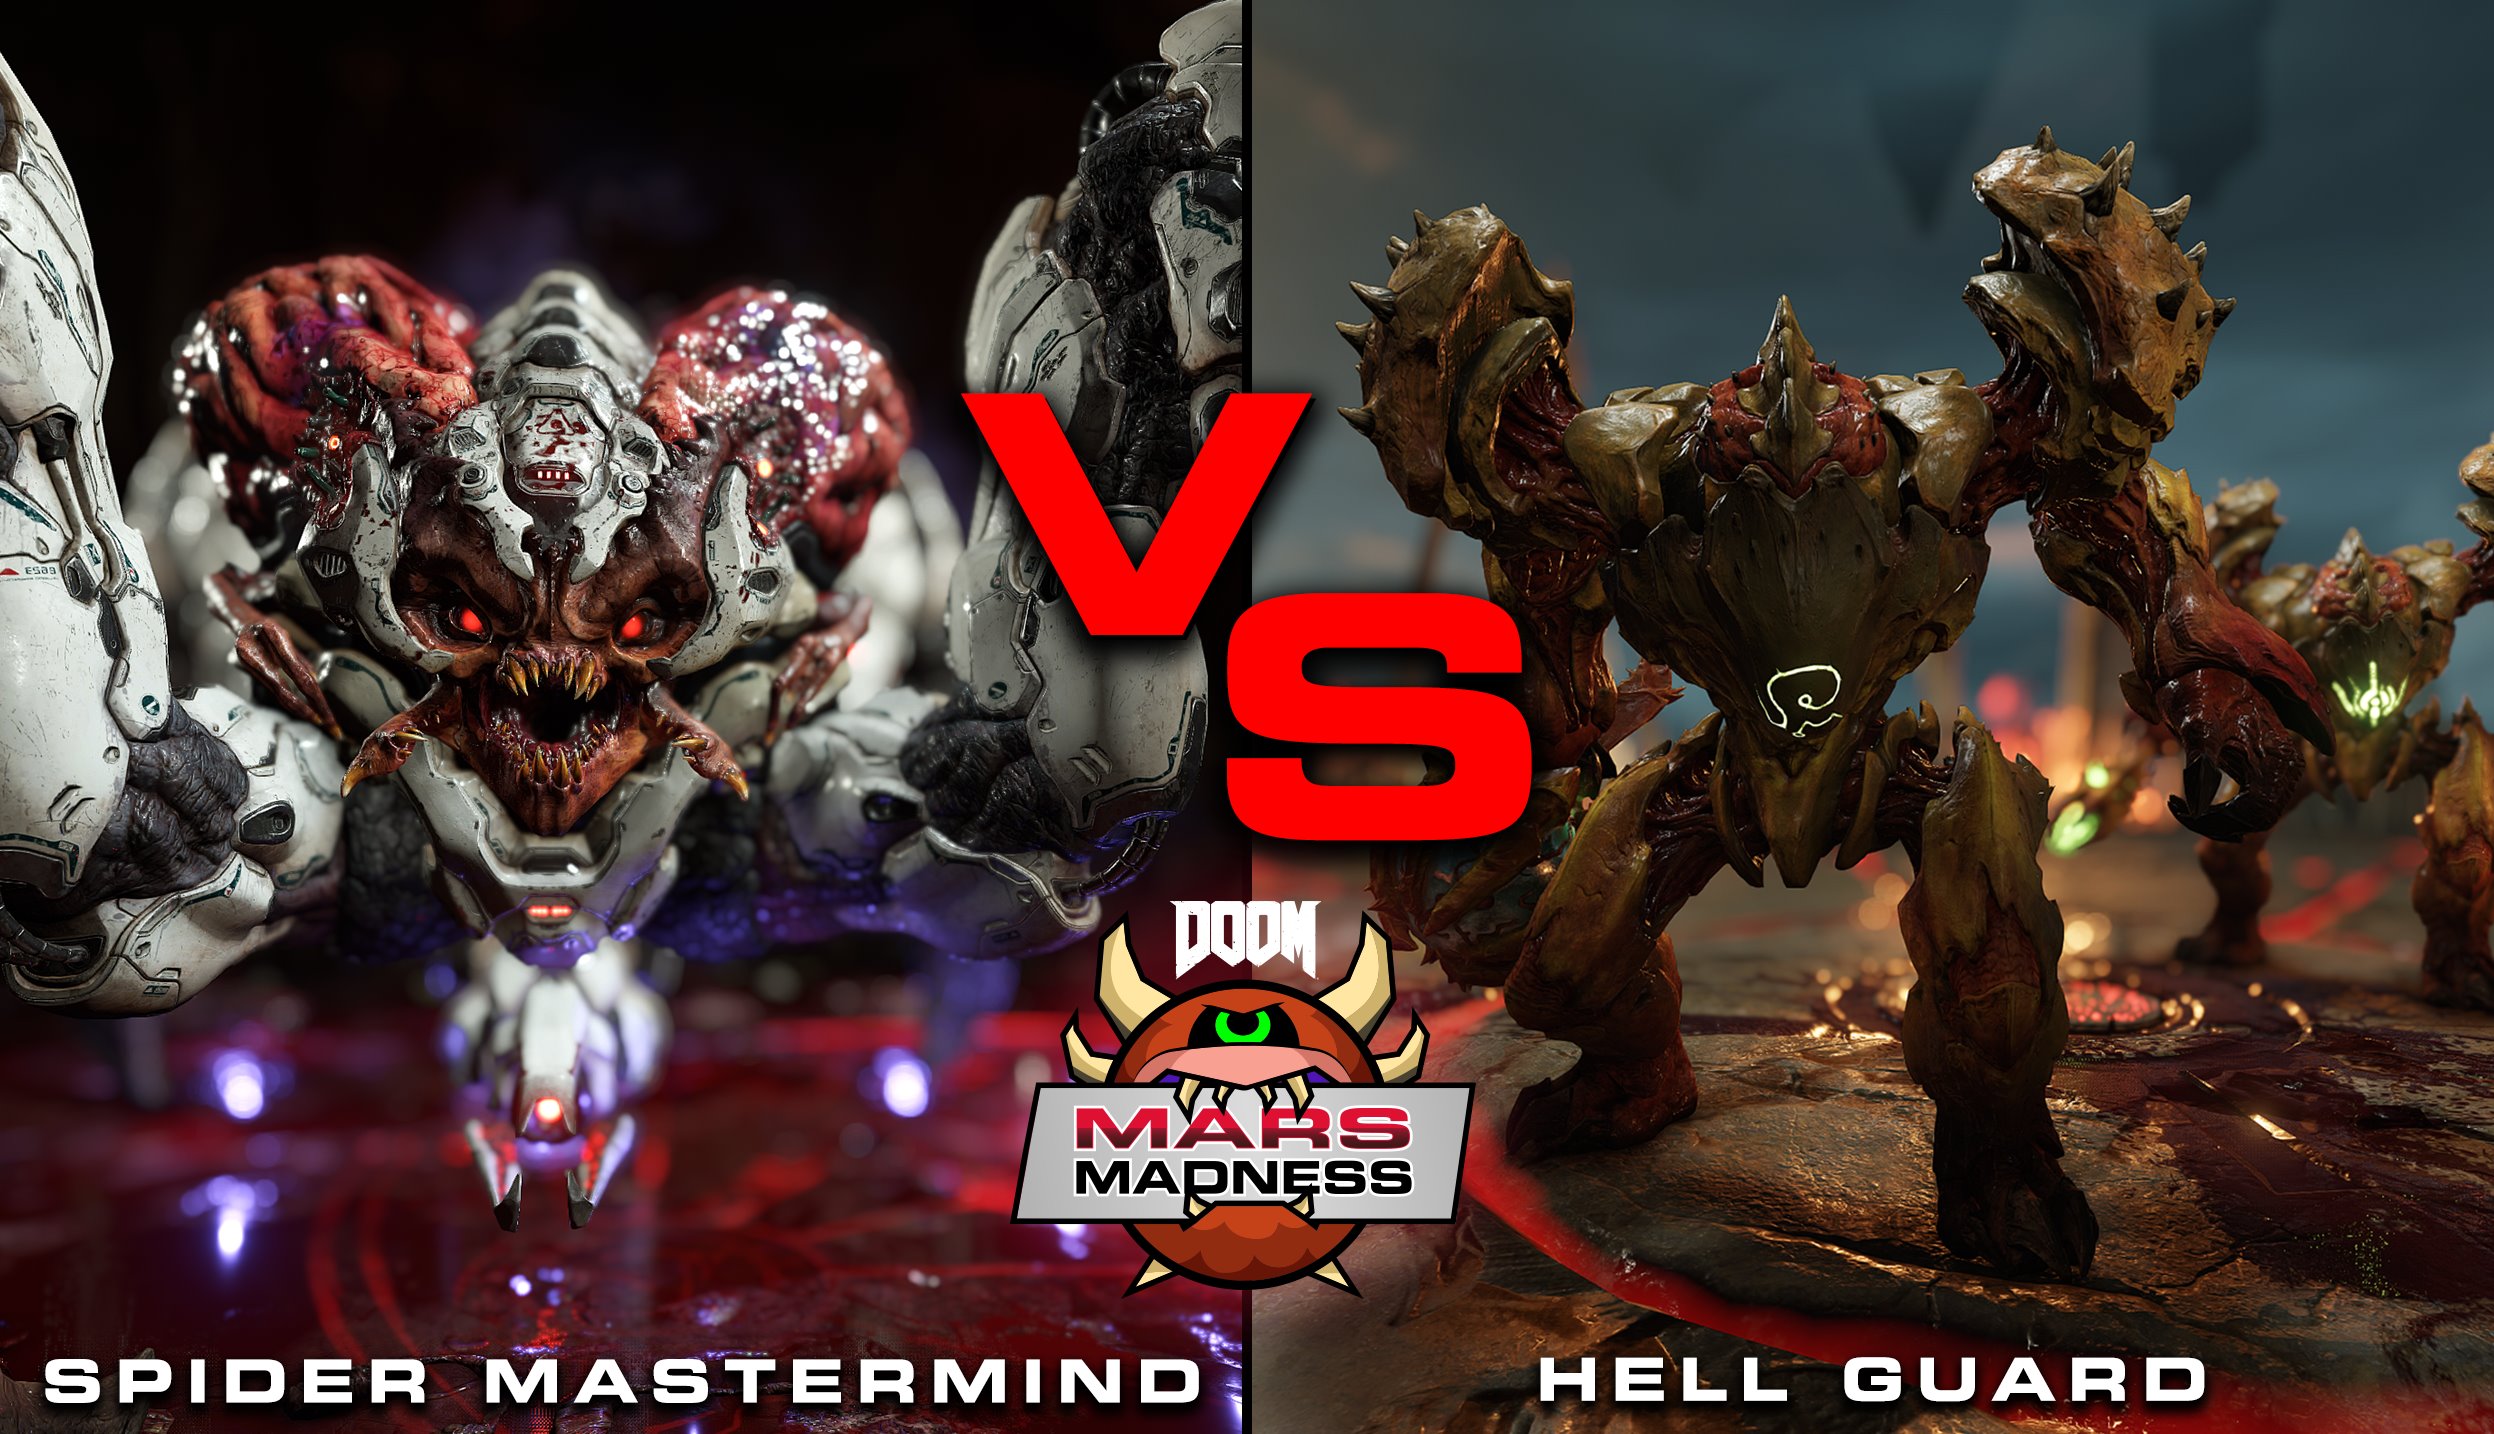 Twitter 上的DOOM："It's a boss battle showdown as the Spider Mastermind faces off against the Hell Guard. Which one will to next week's final 4 of #MarsMadness? Vote https://t.co/94wjQLemz6" /